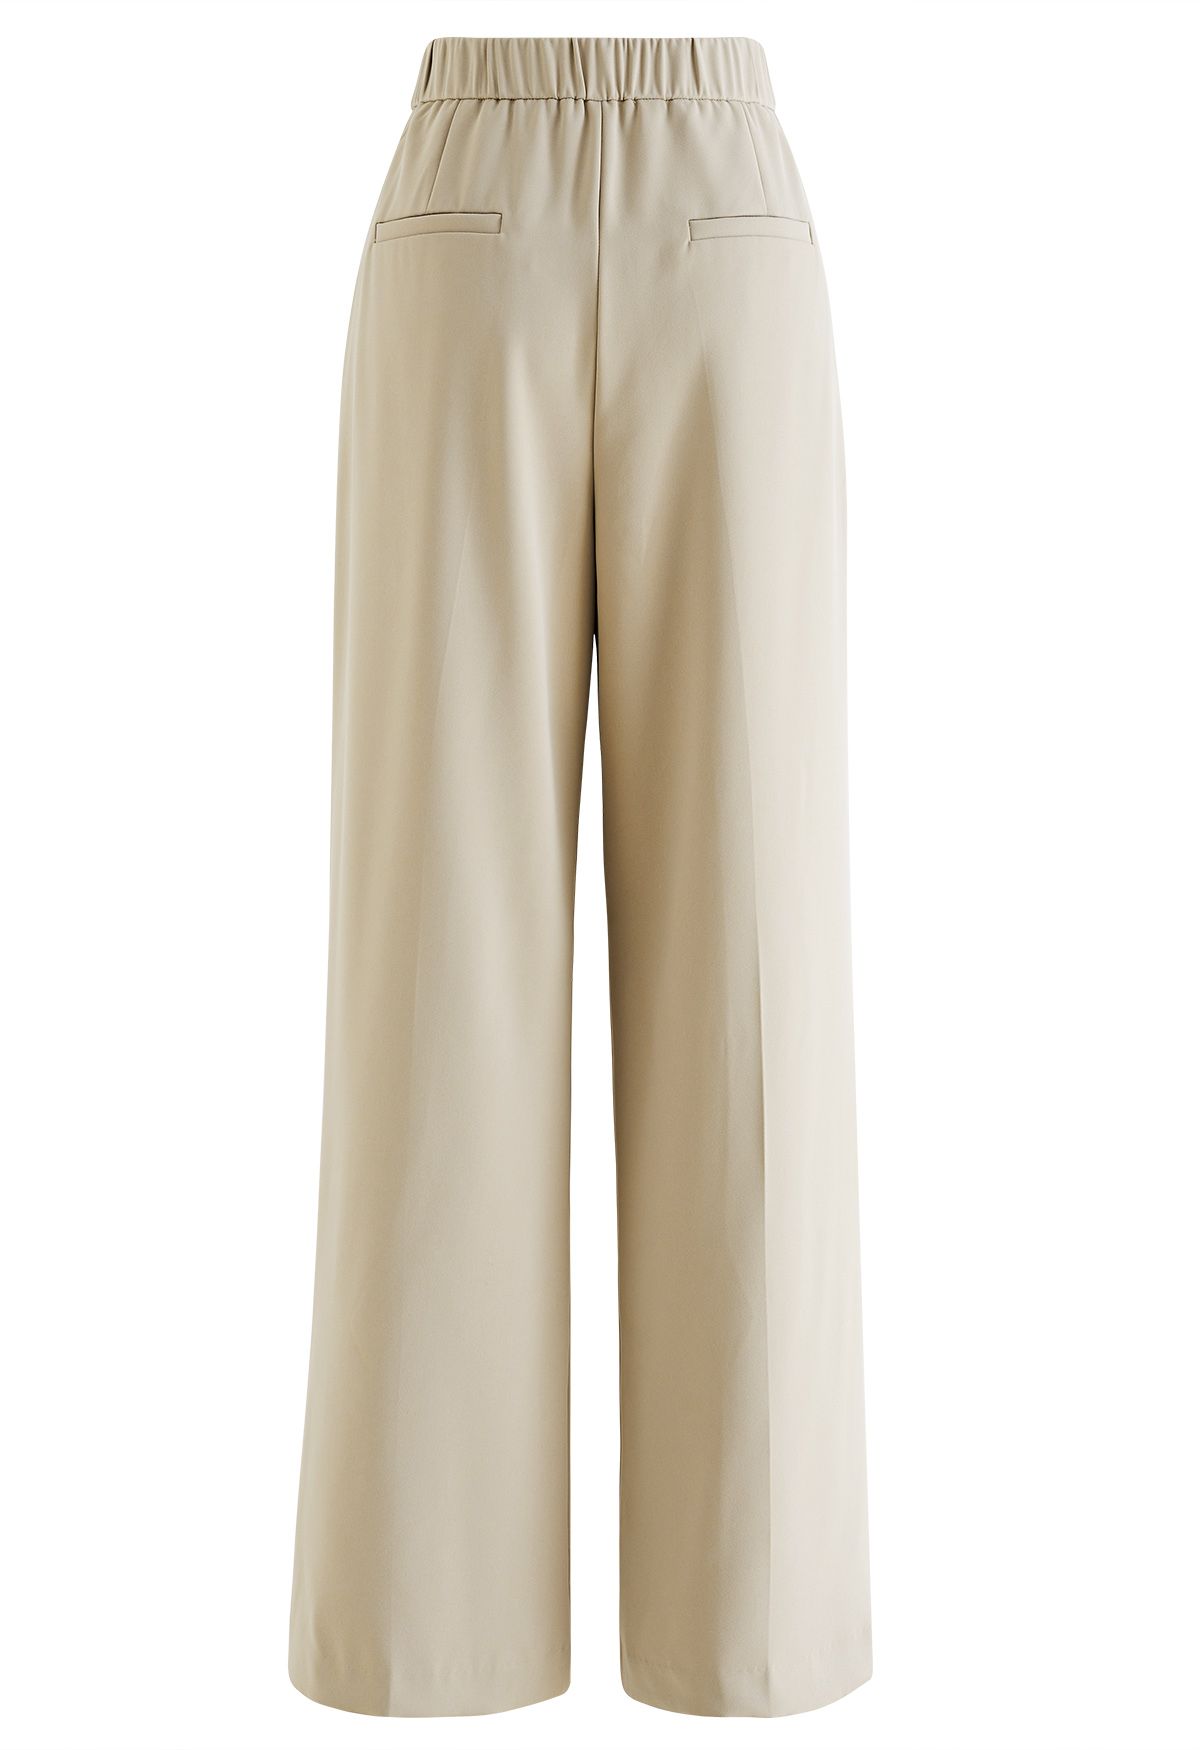 Simple Pleat Straight-Leg Pants in Light Tan - Retro, Indie and Unique ...